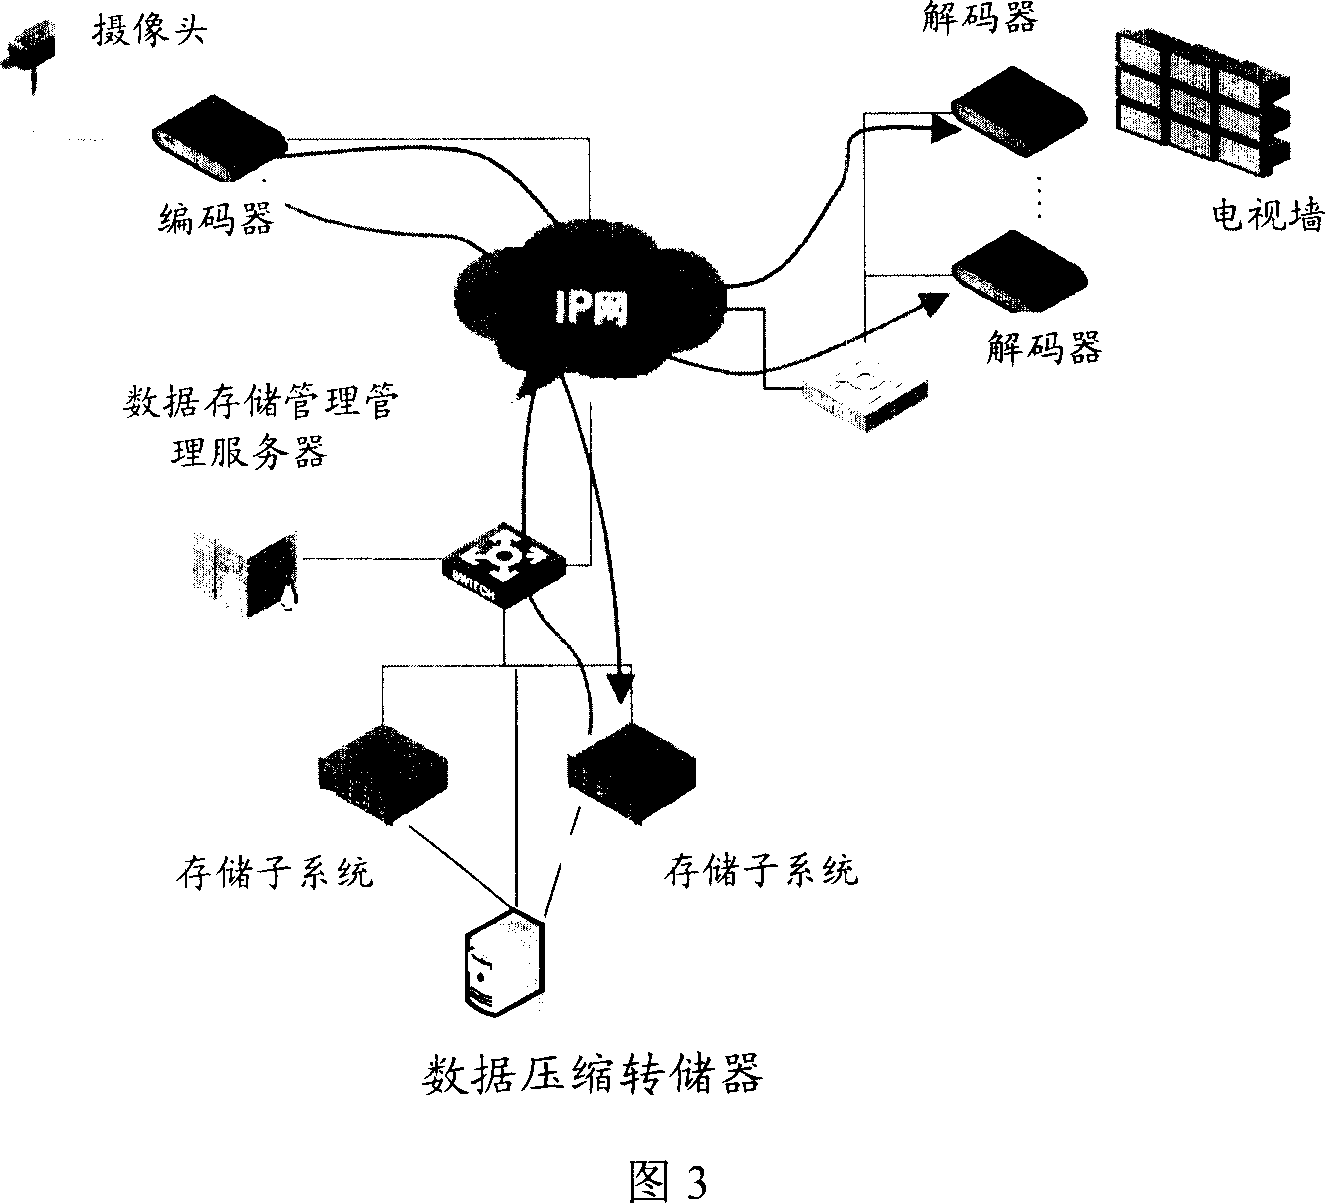 Frequency-video monitoring system and data compression dump device